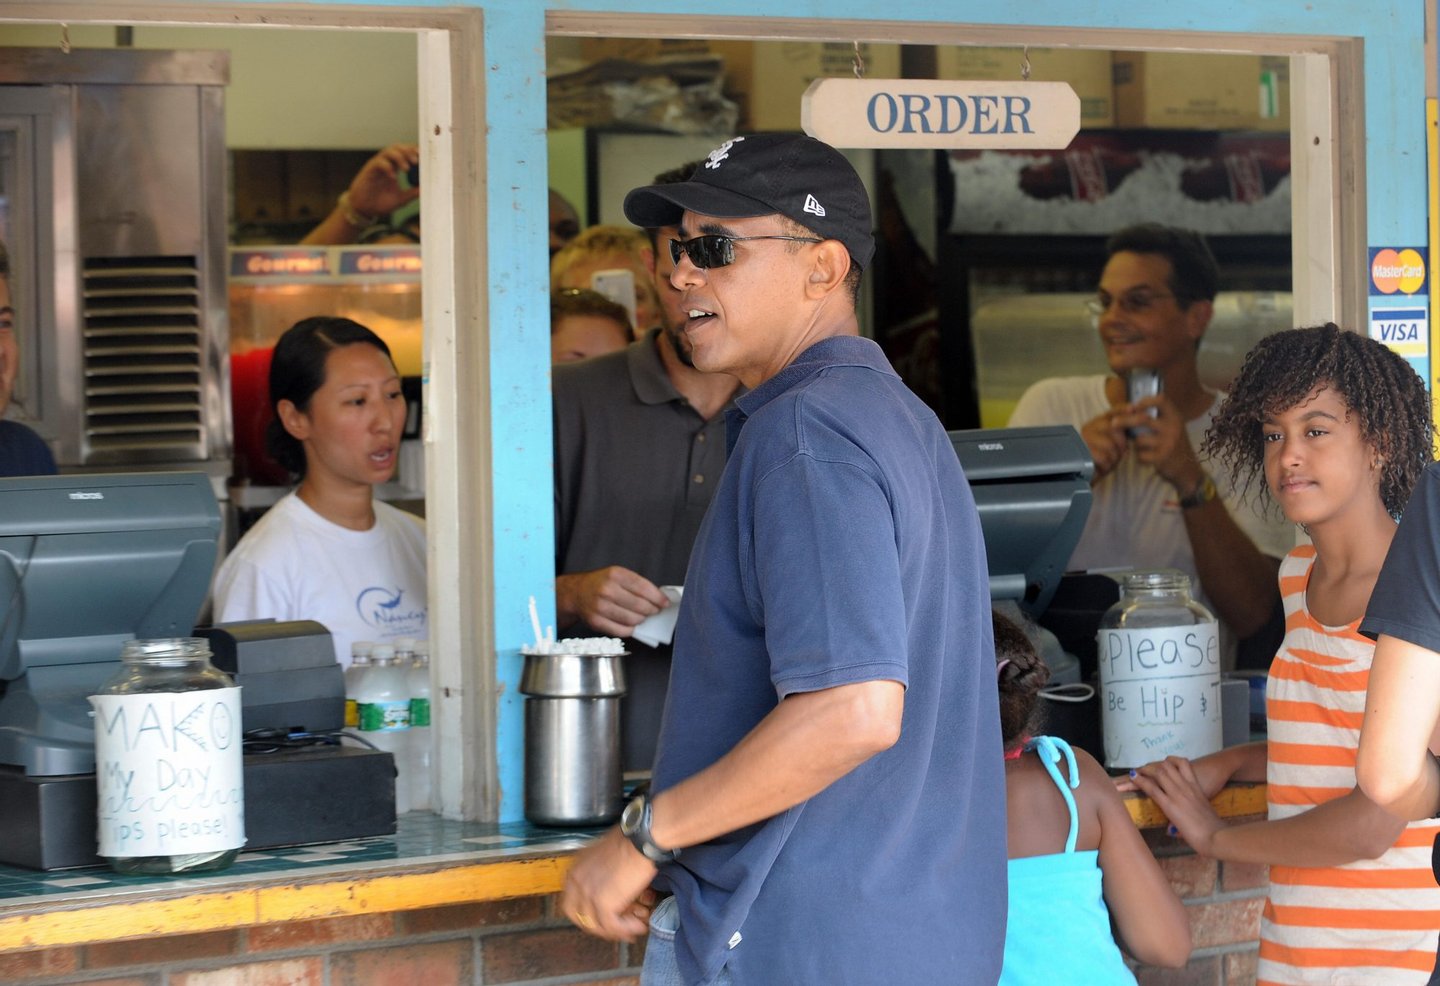 US President Barack Obama and his daughters Malia and Sasha (hidden)order their lunch at Nancy's fast food restaurant in Oak Bluffs on Martha's Vineyard, Massachusetts, on August 26, 2009. AFP PHOTO/Jewel SAMAD (Photo credit should read JEWEL SAMAD/AFP/Getty Images)